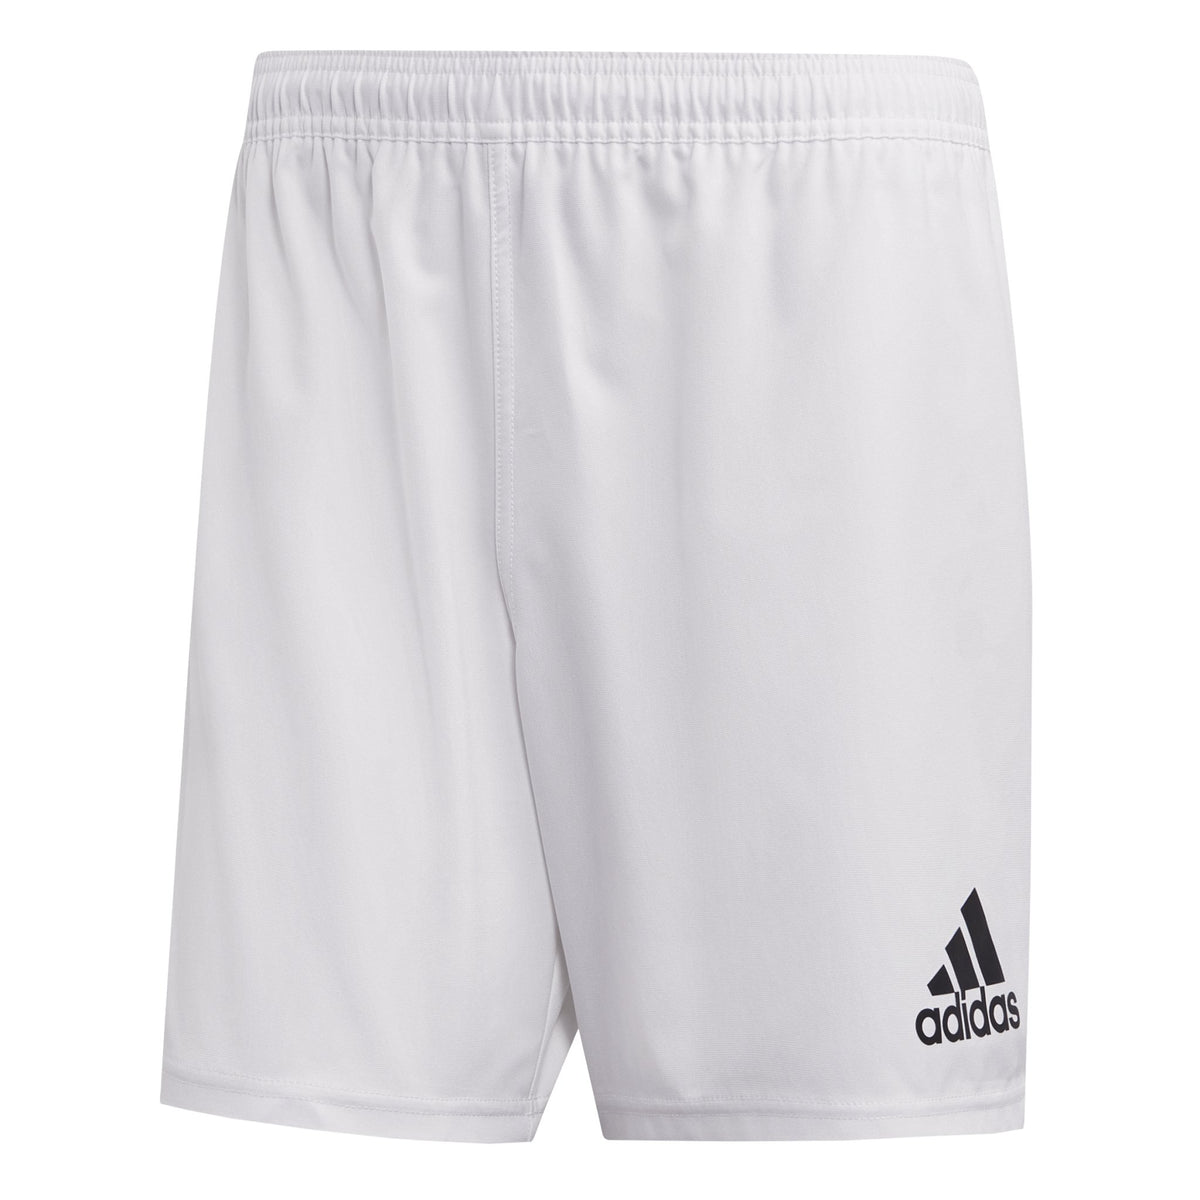 Adidas Rugby 3 Stripe Shorts - White |Shorts | Adidas | Absolute Rugby